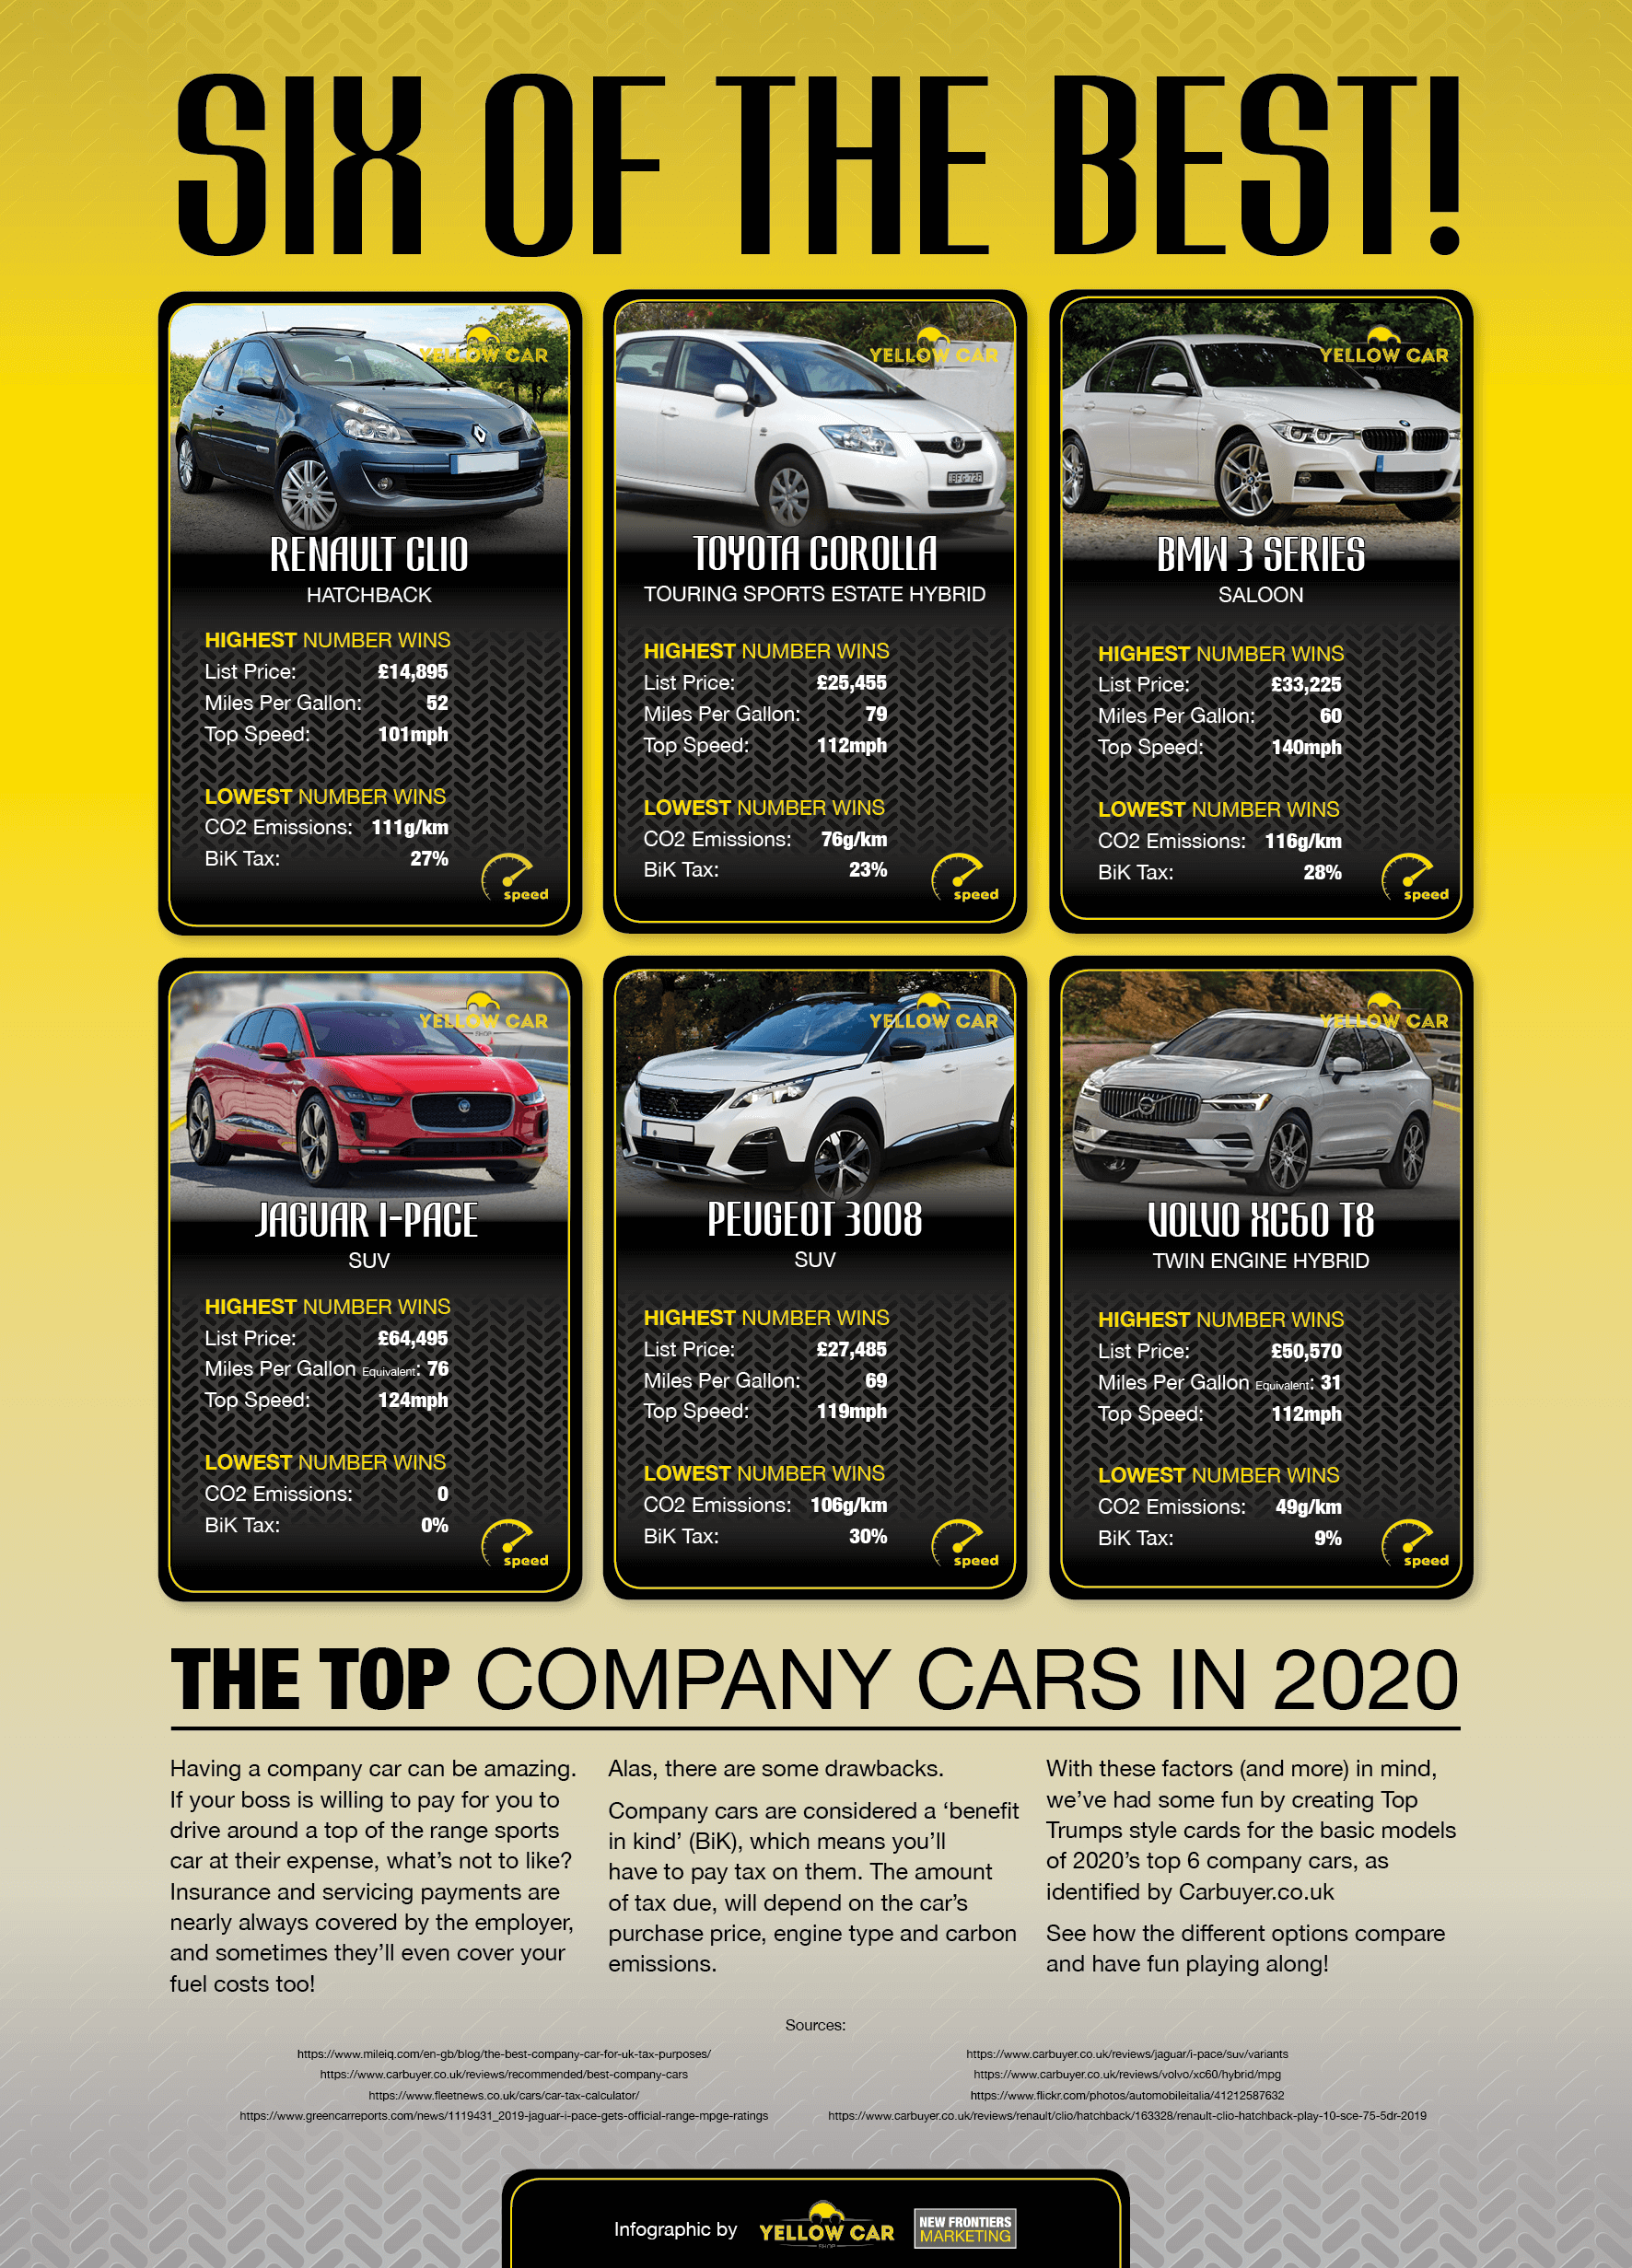 The Top Company Cars in 2020 2